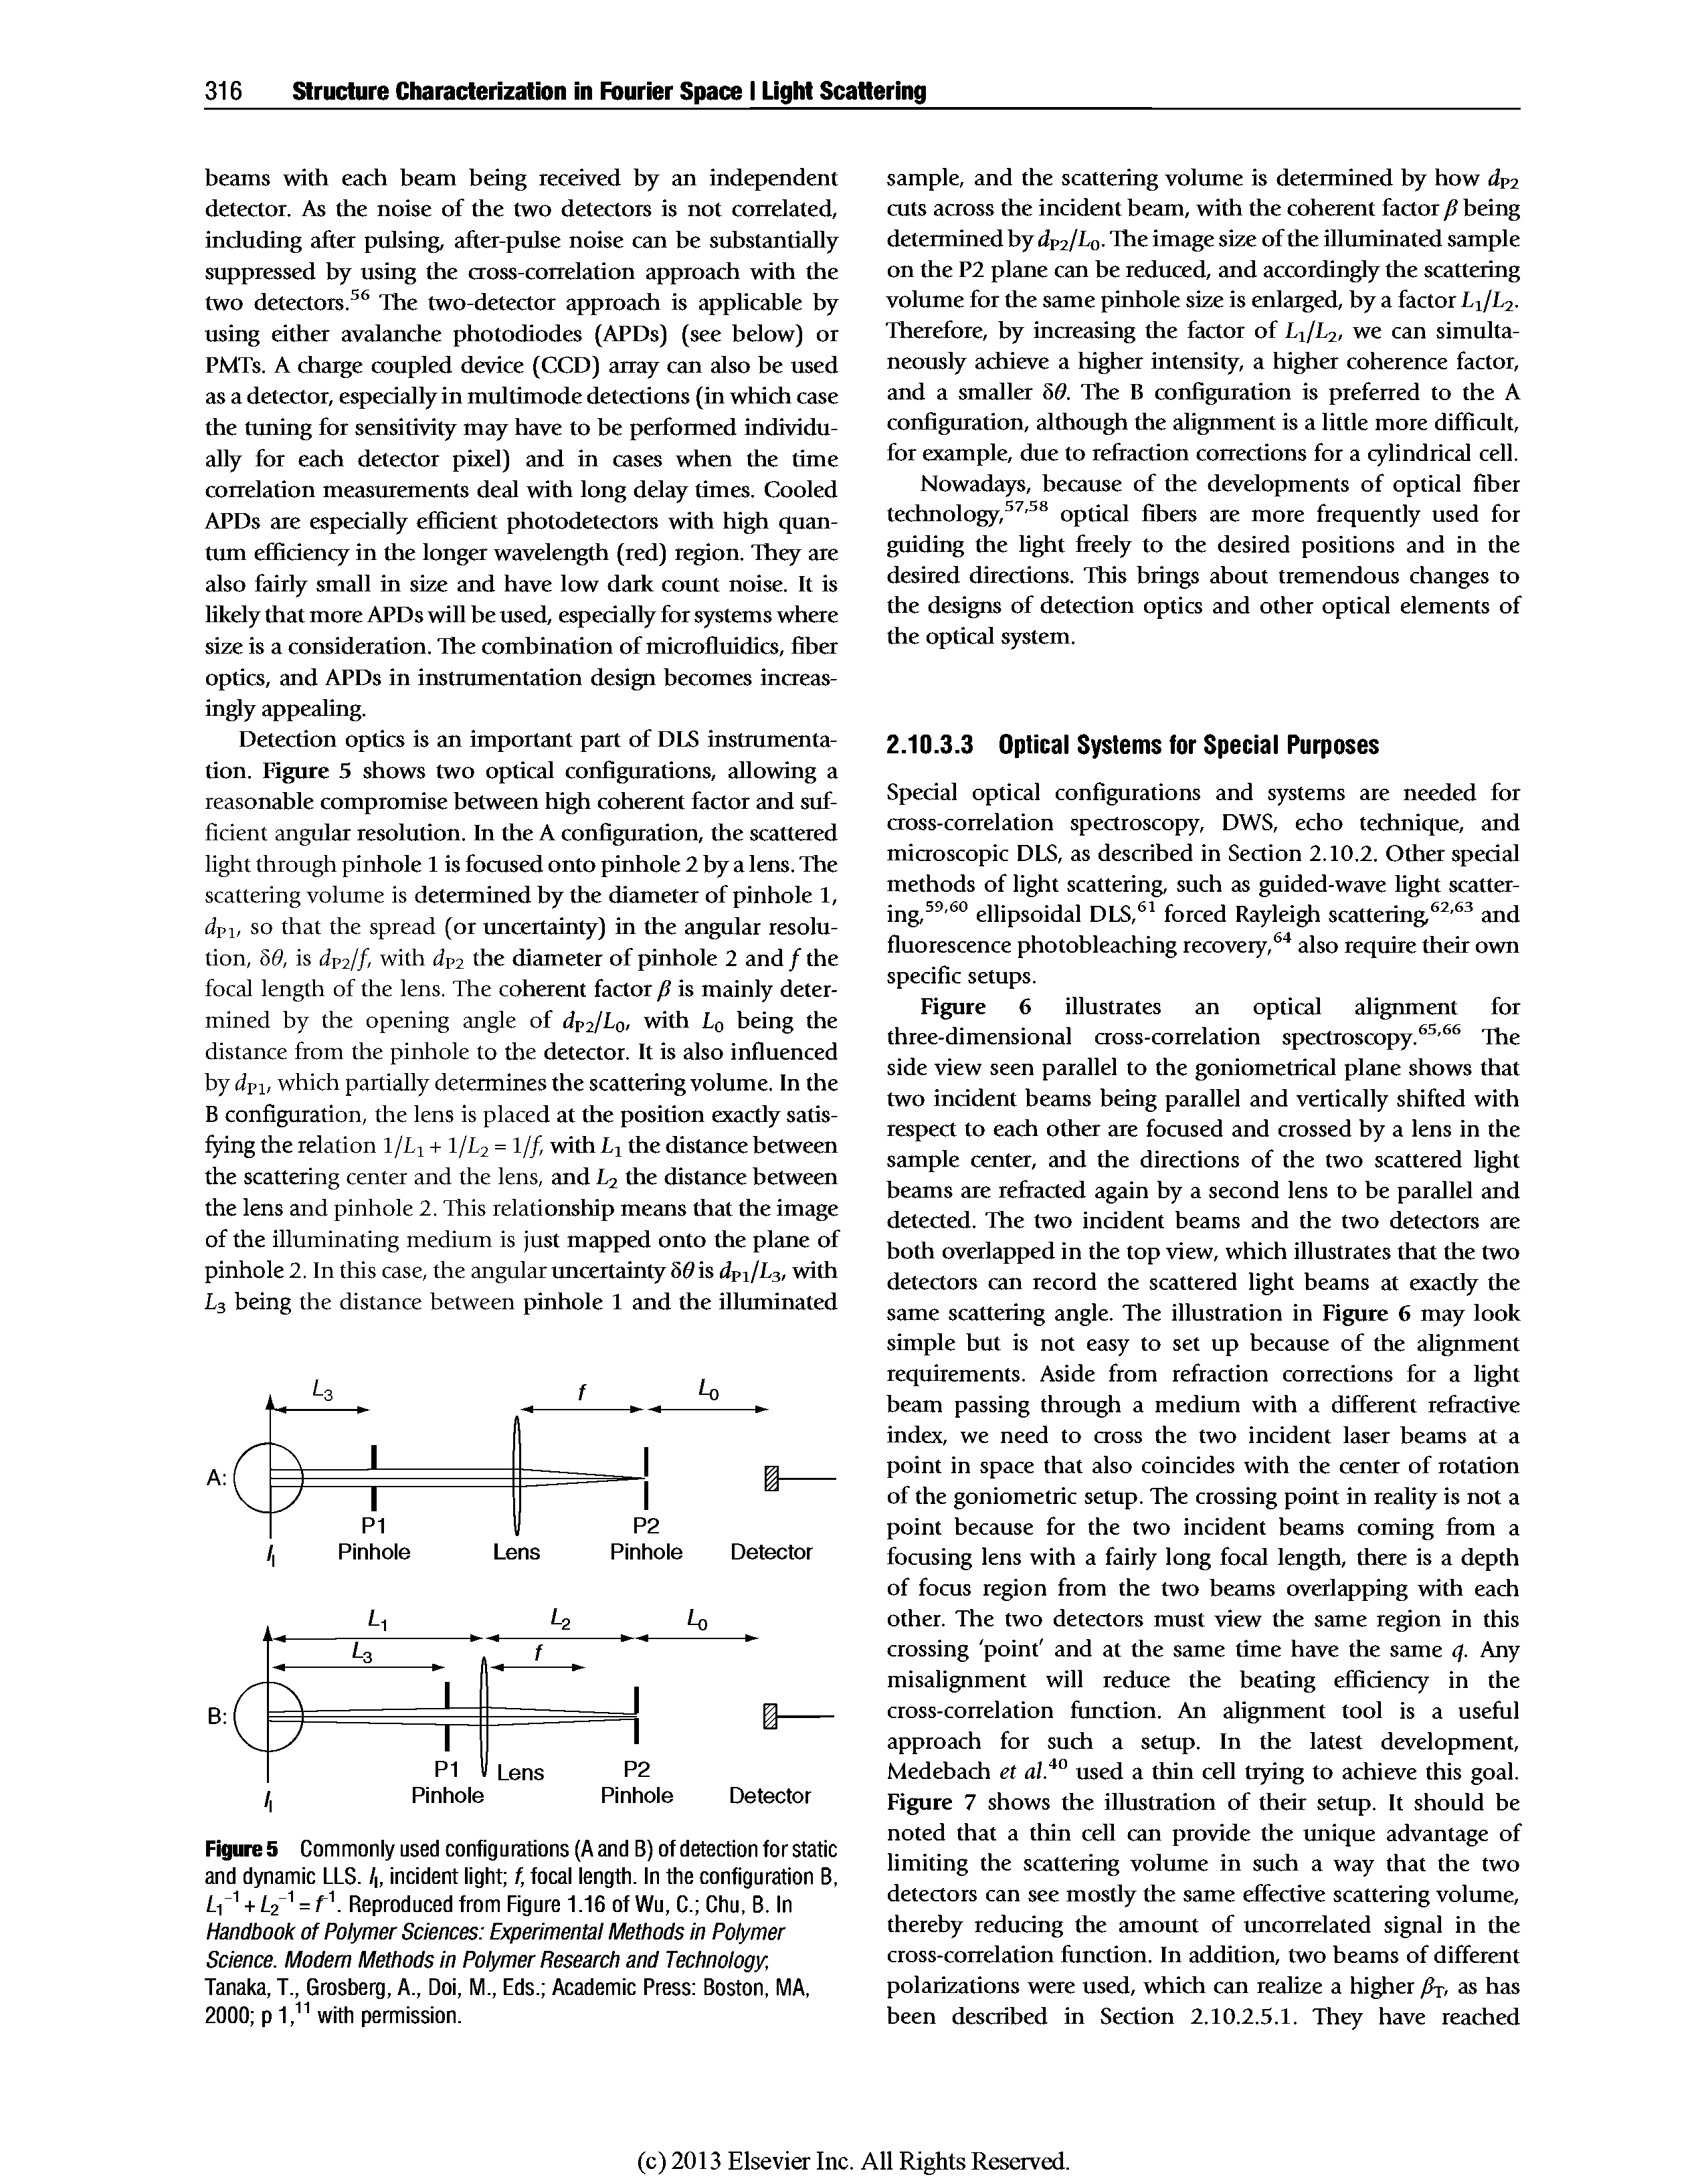 Figure 5 Commonly used configurations (A and B) of detection for static and dynamic LLS. /, incident light f, focal length. In the configuration B, fr +1.2 = f - Reproduced from Figure 1.16 of Wu, C. Chu, B. In Handbook of Polymer Sciences Experimental Methods in Polymer Science. Modem Methods in Polymer Research and Technology,...